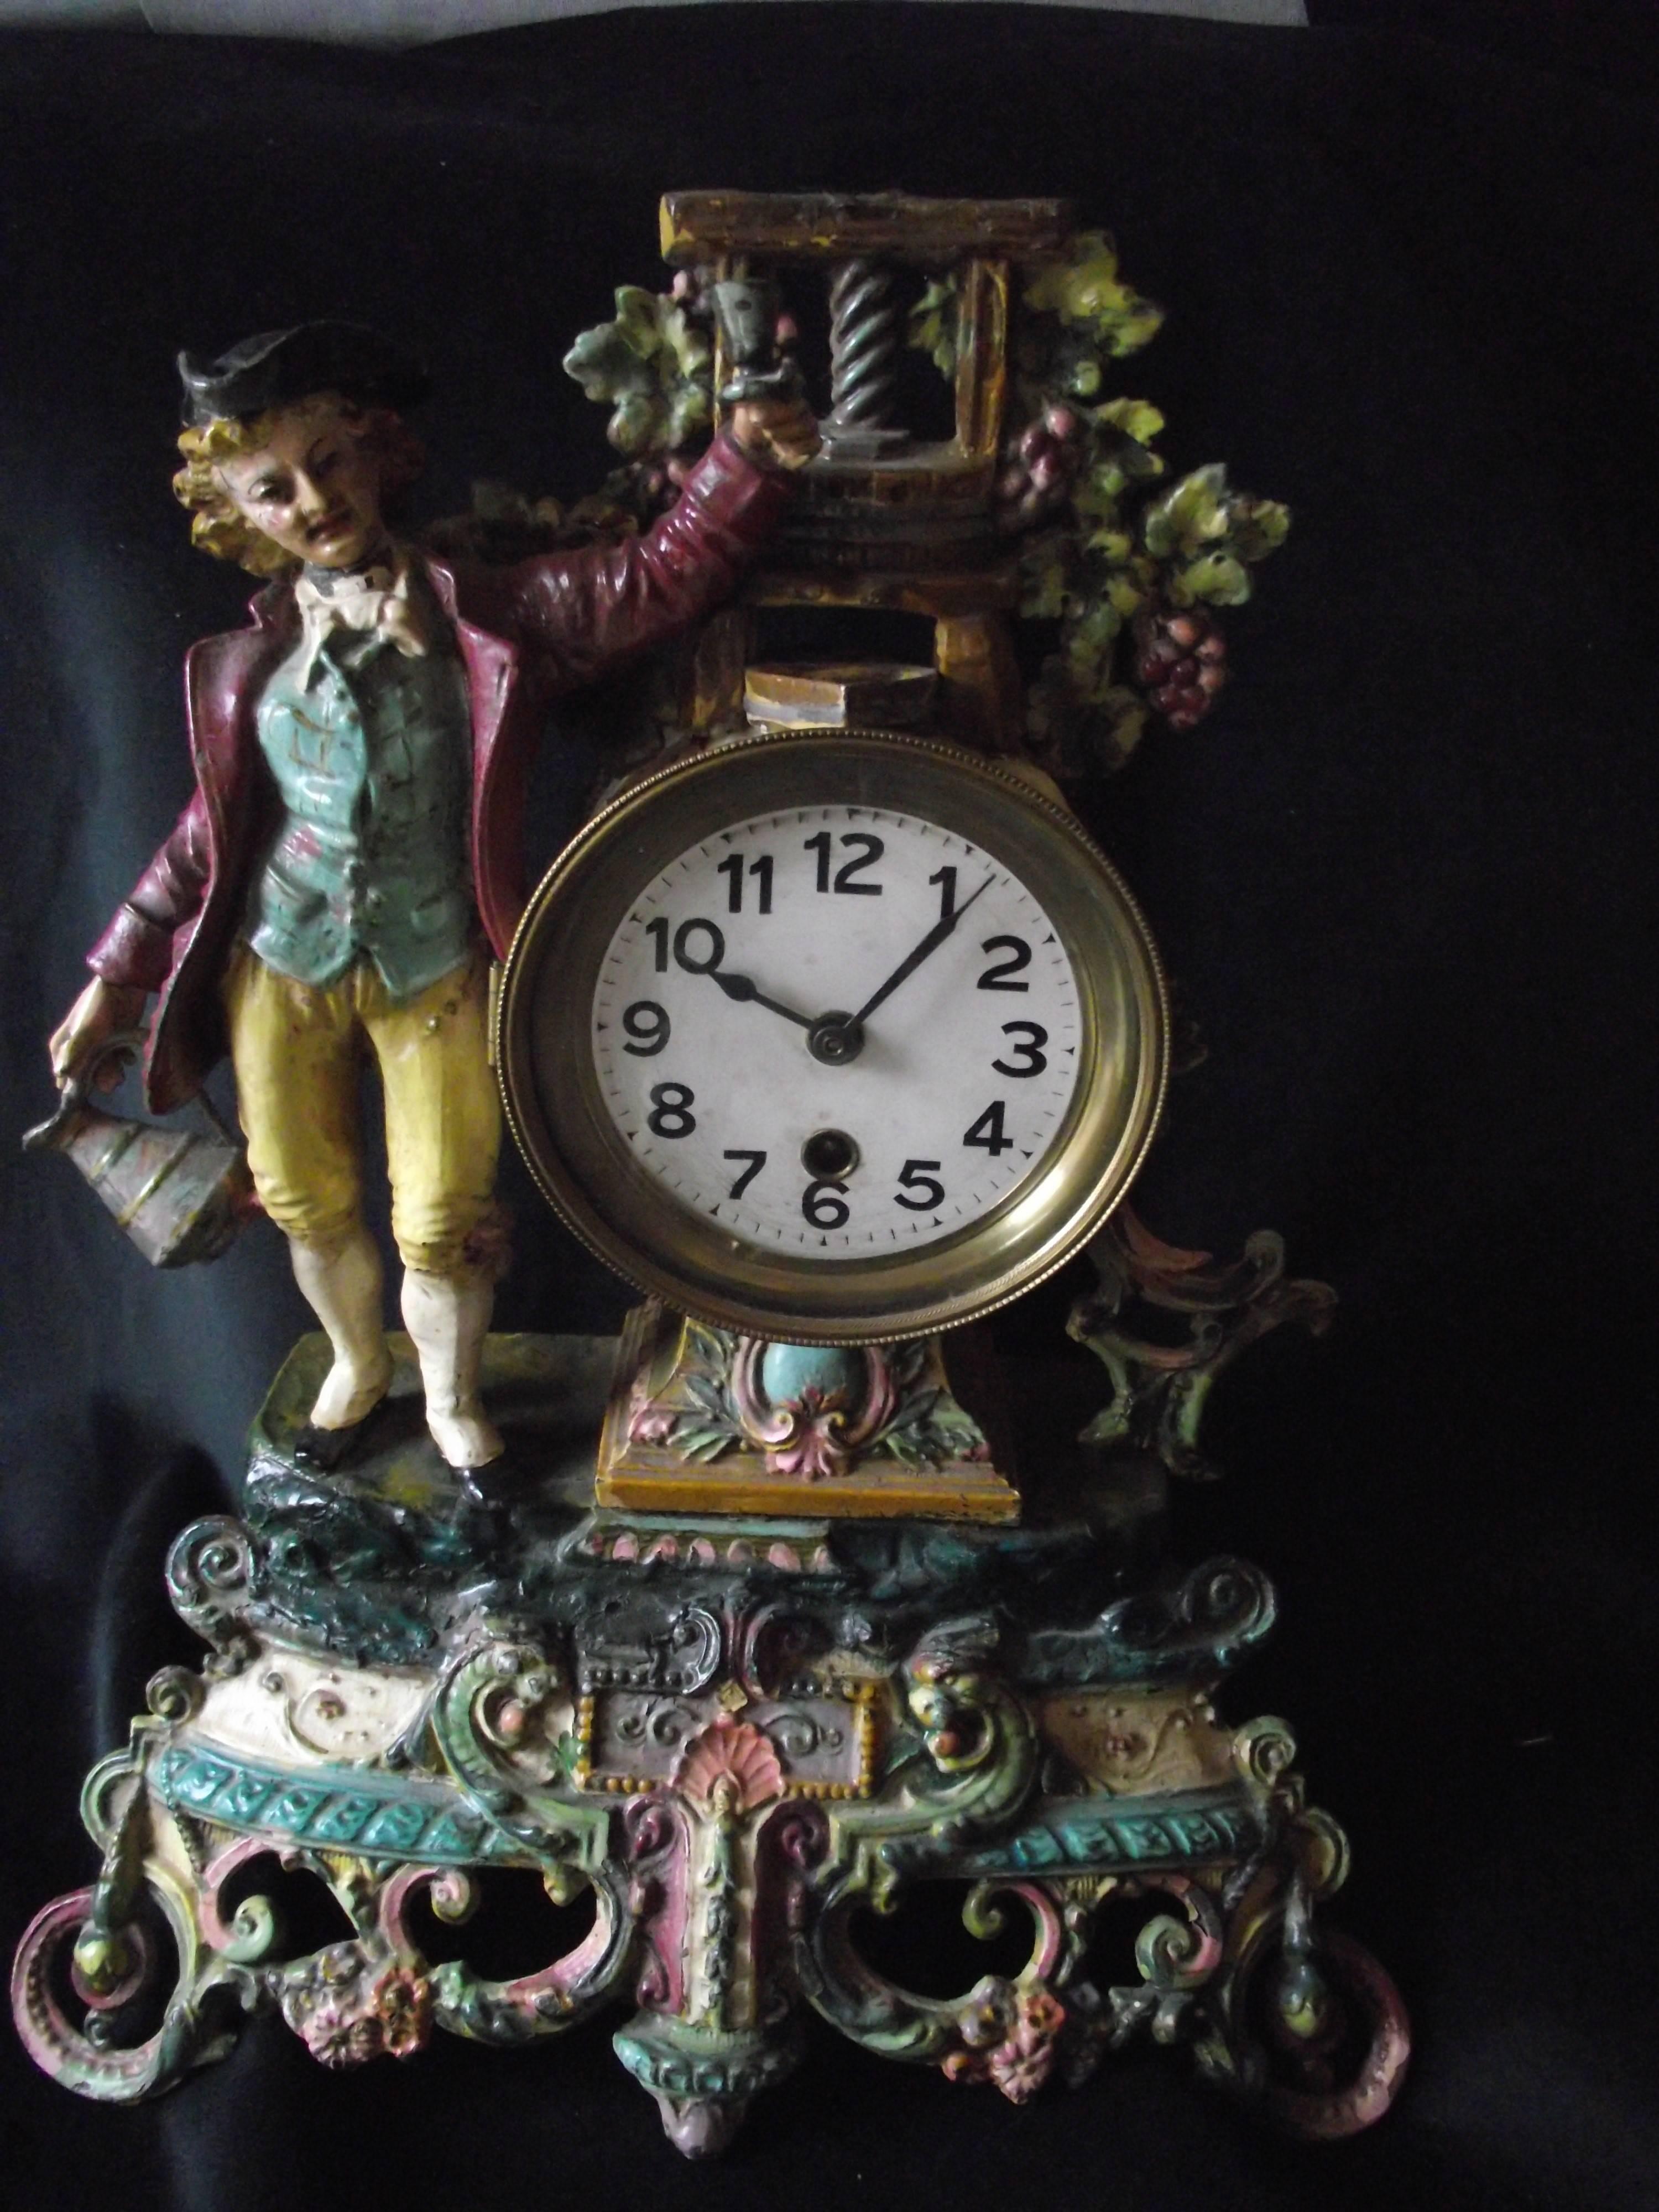 This beautiful antique painted clock features a jolly fellow toasting a good year's grape season in front of the wine press. These painted metal clocks are rare finds.

The clock works are a one day wind, time only. Movement of uncertain origins.